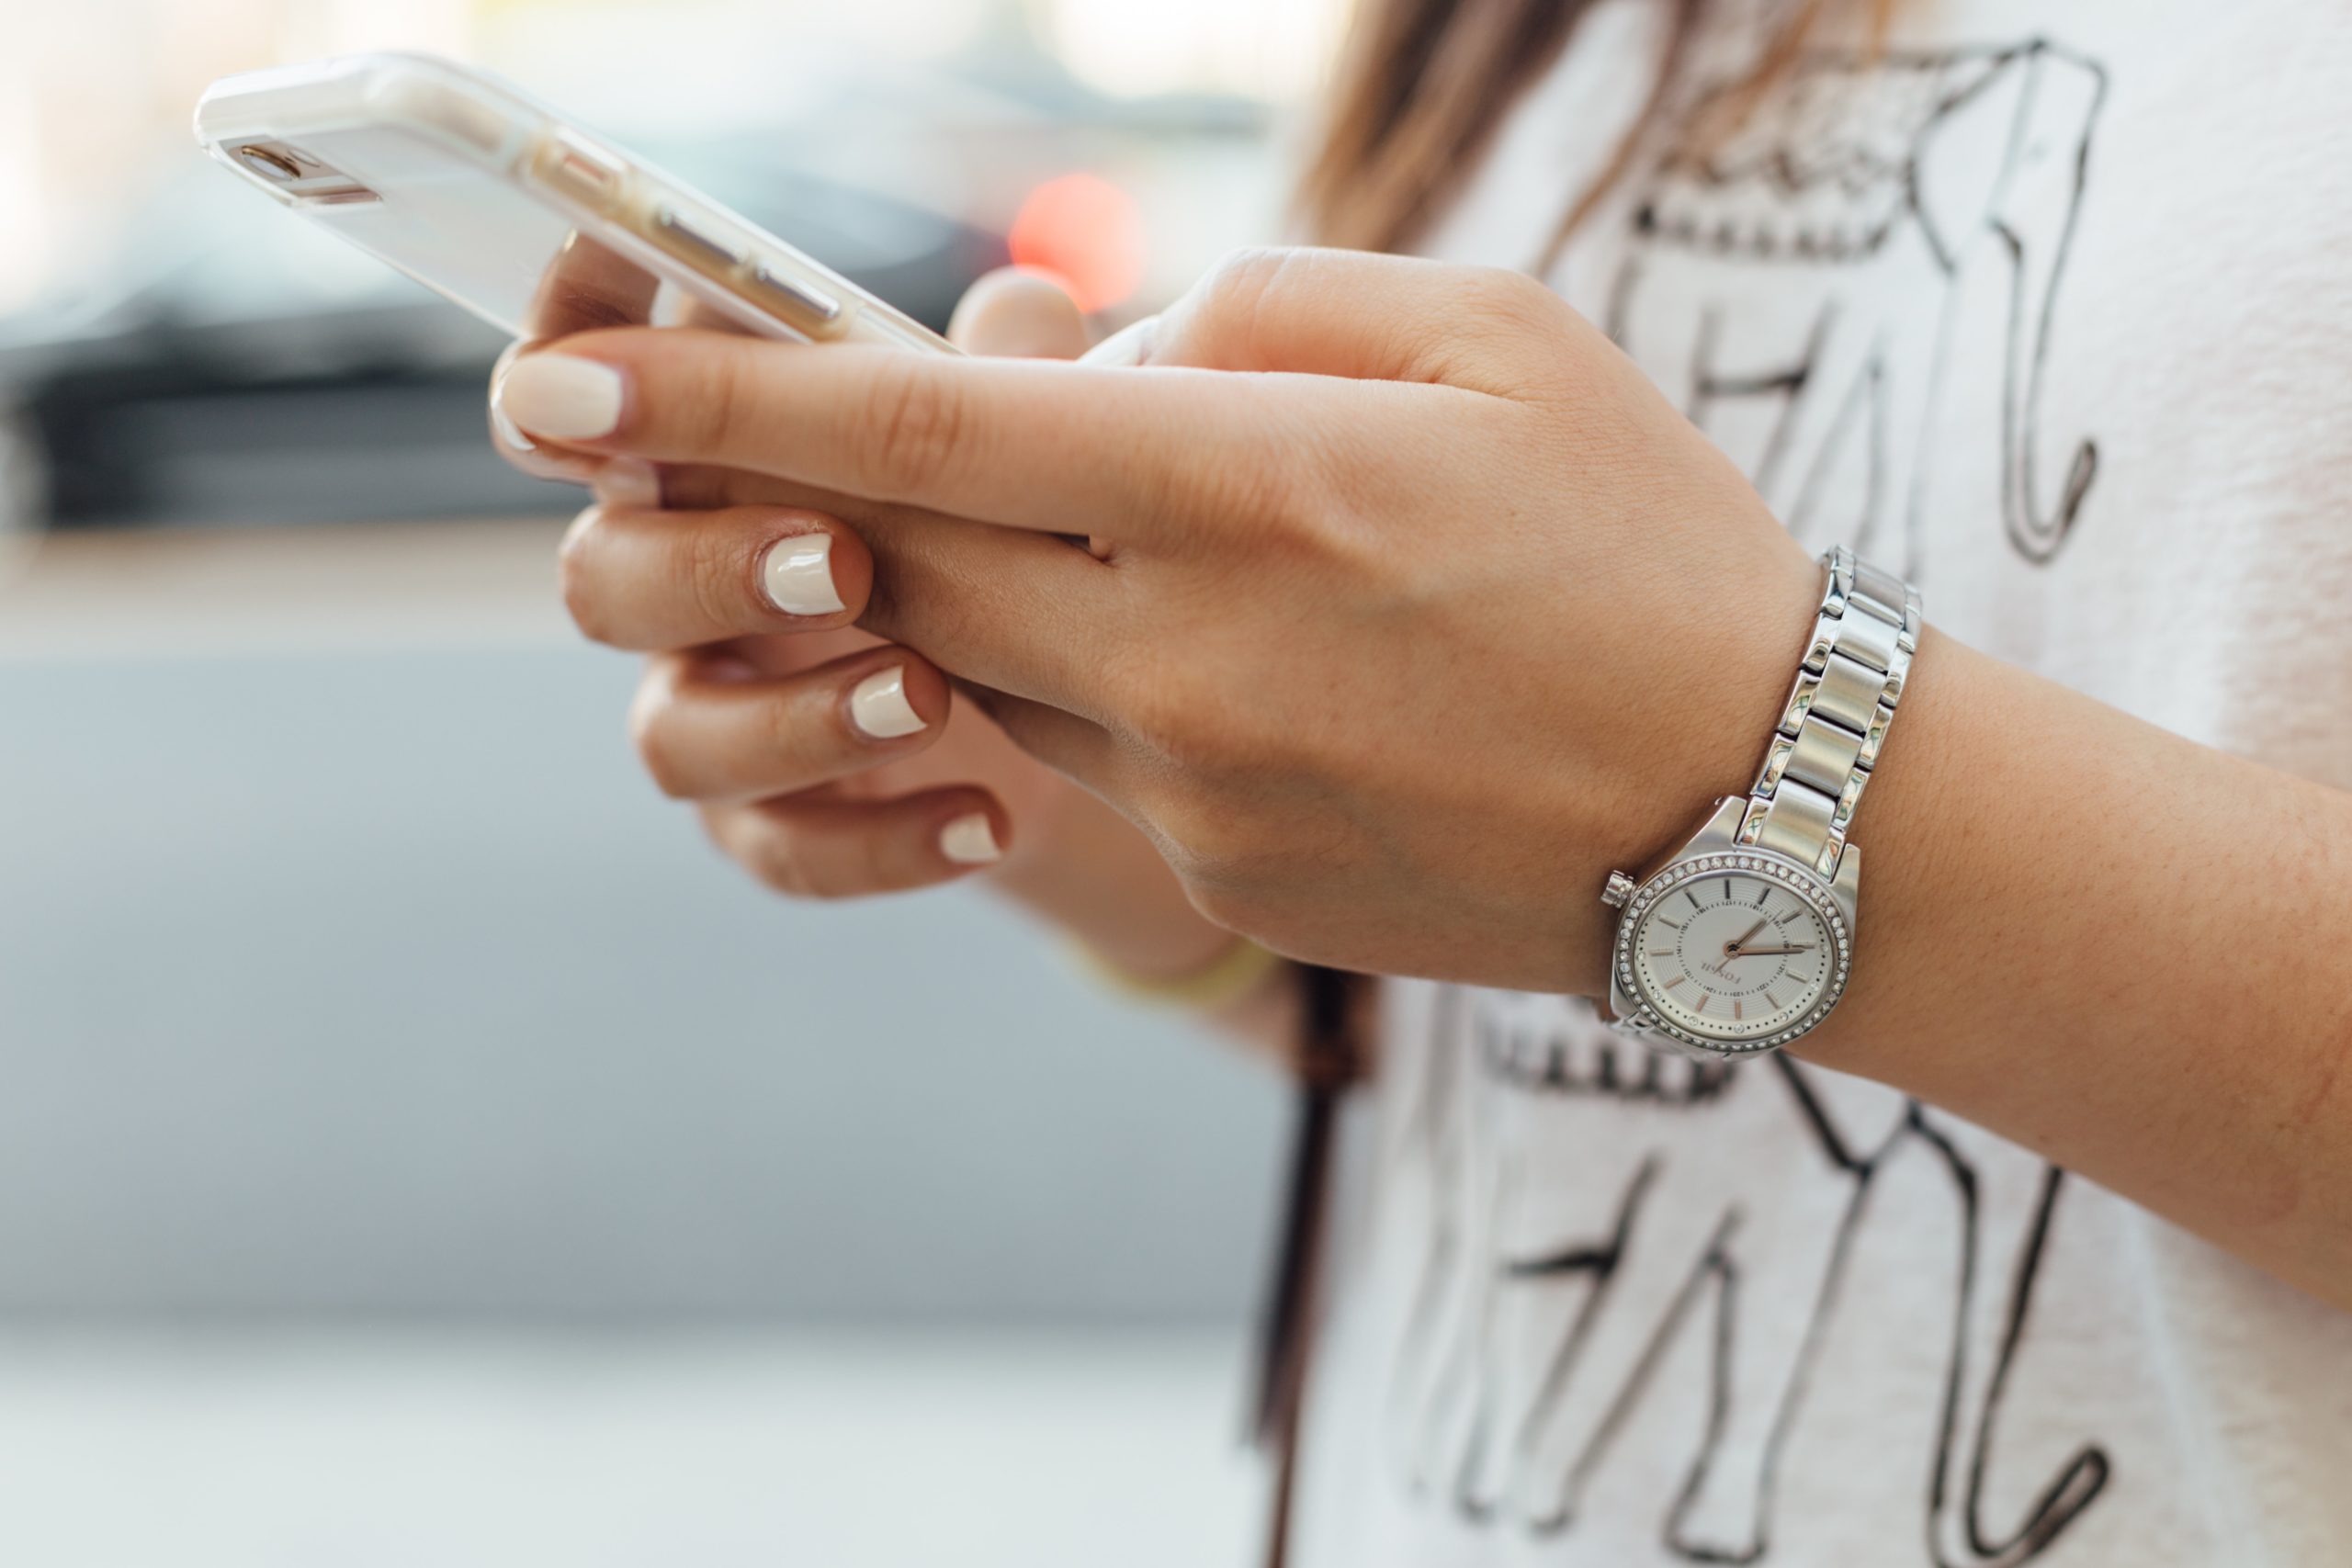 Girl with white nail polish and silver wrist watch holding a phone.